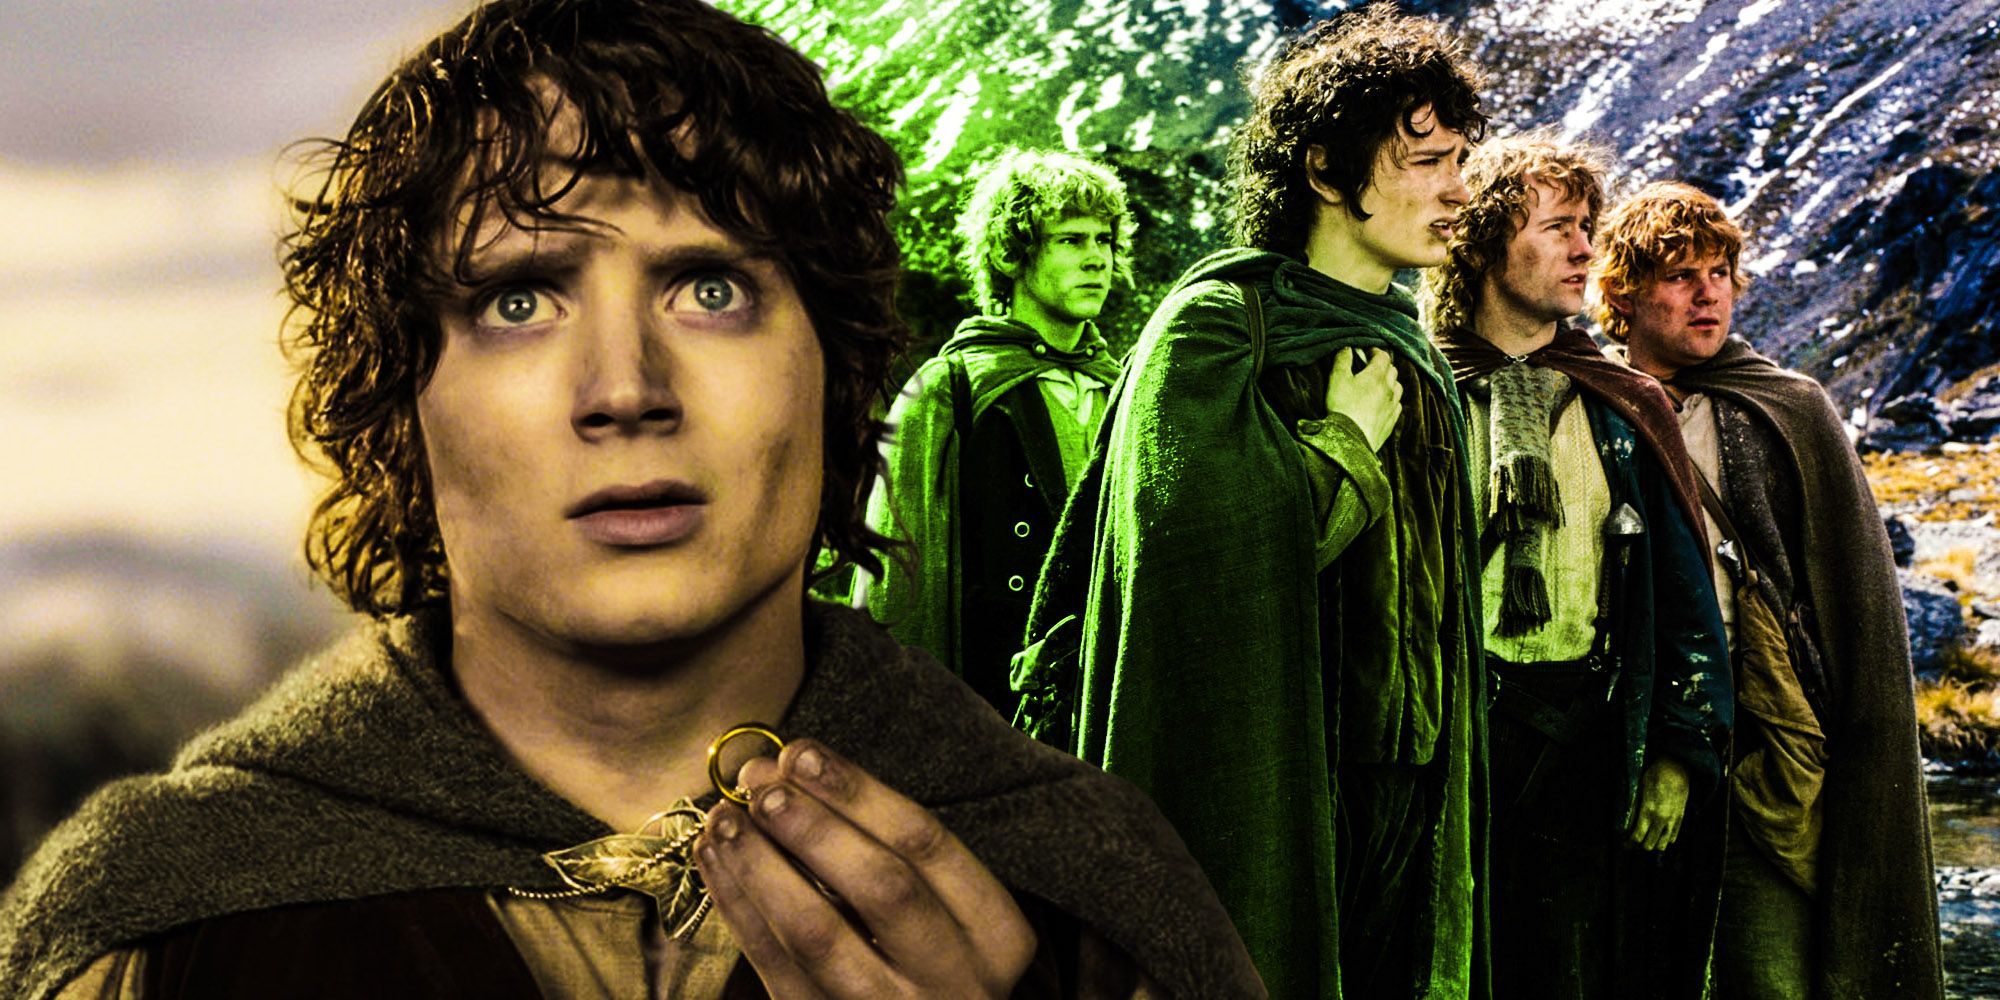 Frodo and the hobbits not corrupted by the one ring lord of the rings